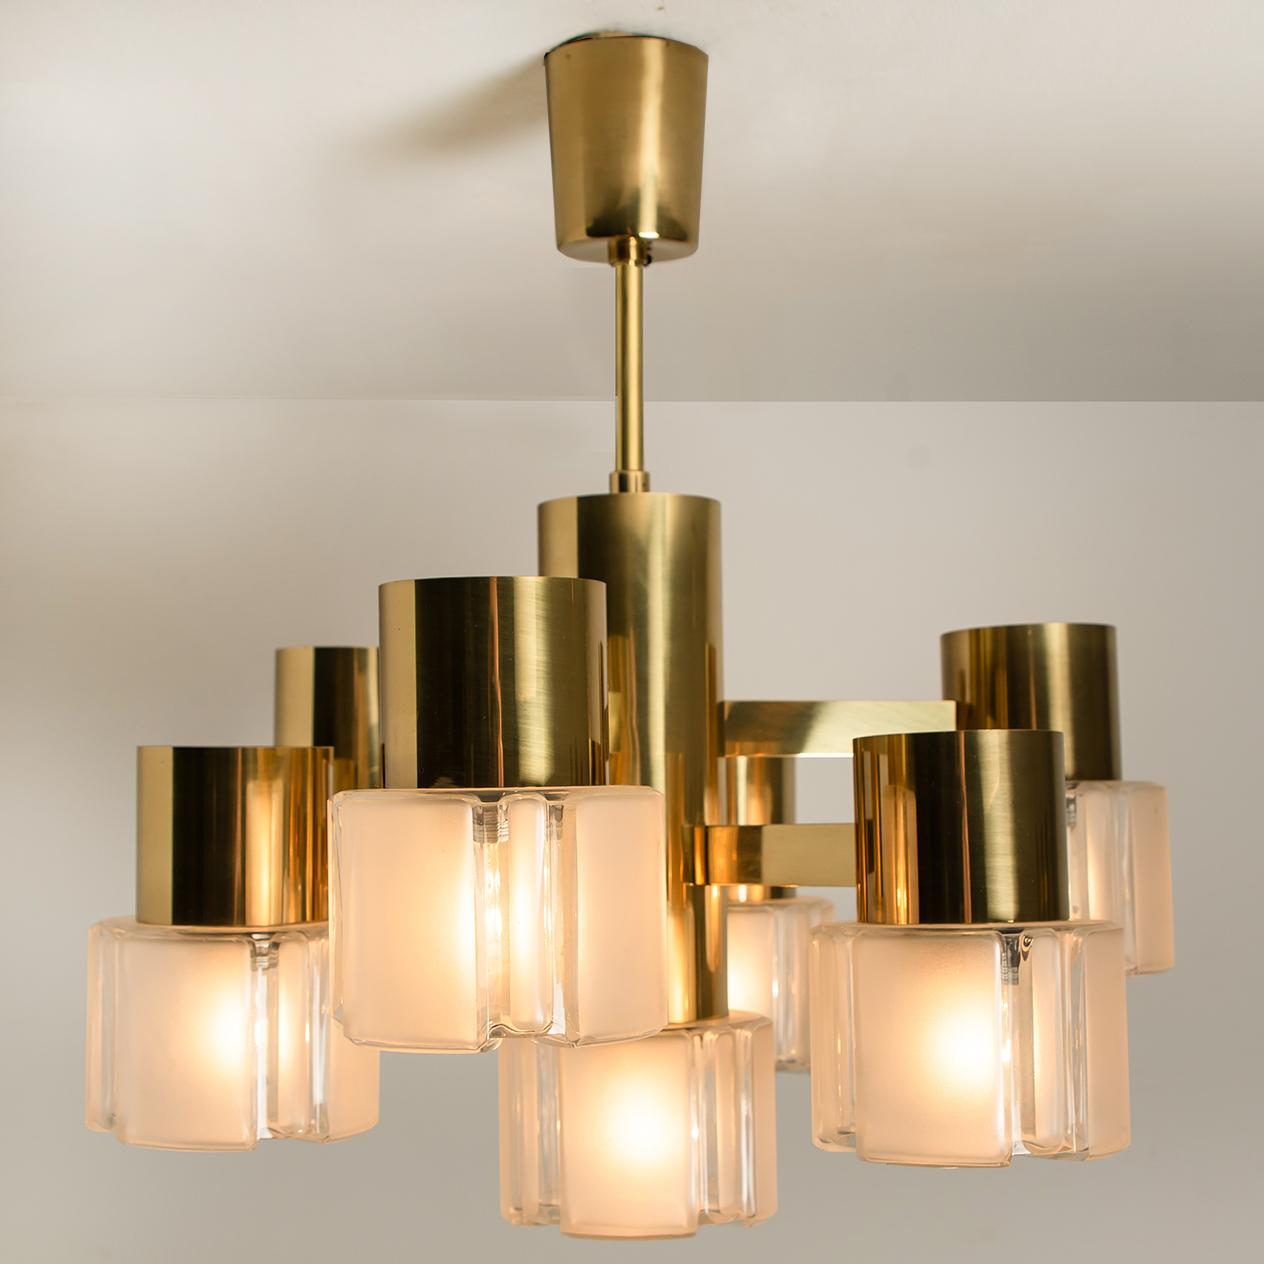 Mid-20th Century Hillebrand Chandelier Matt and Clear Glass Shades and Brass, circa 1970s Germany For Sale